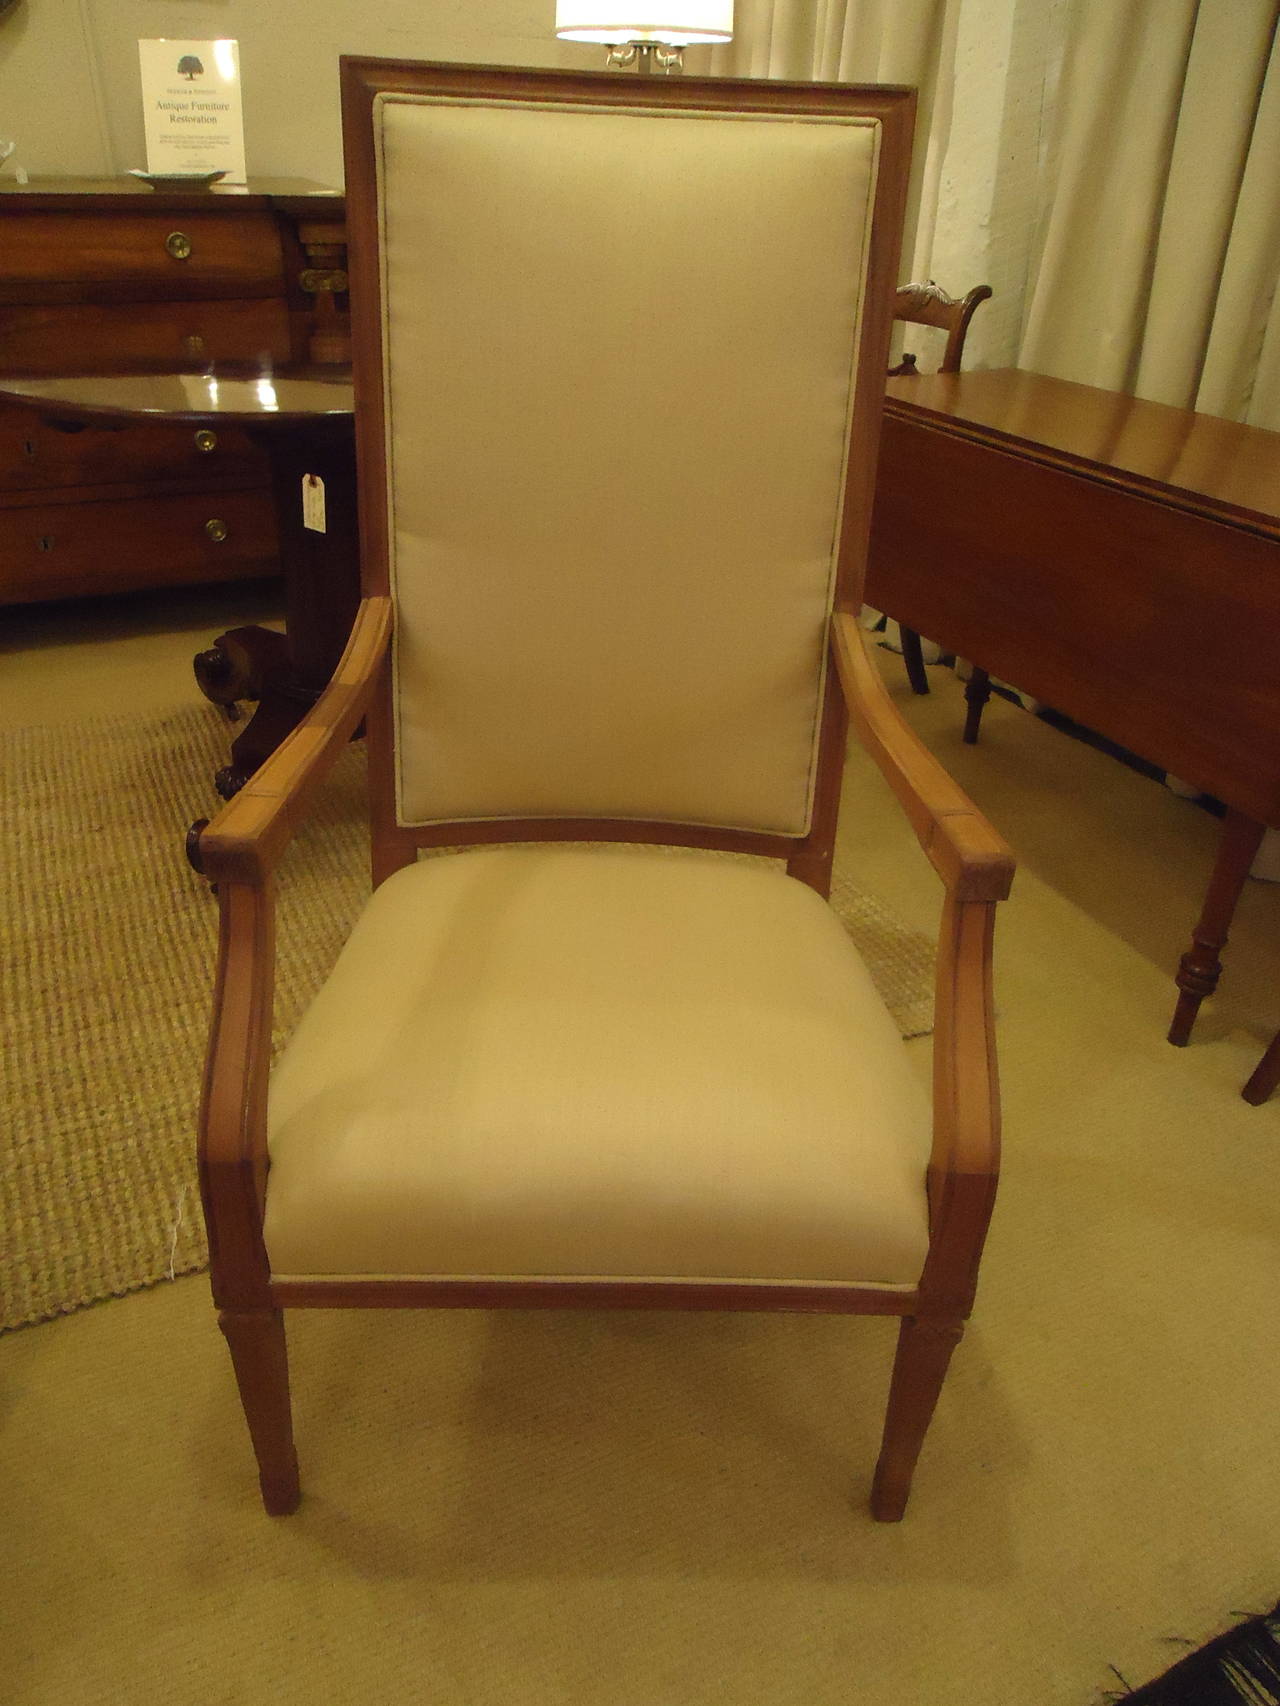 Elegant high back armchairs with raw carved mahogany frames and newly upholstered in sisal colored heavy gauge linen.
Measure: Arm to arm 23 W.
Back of chair 19.5 W.
Seat depth 21.